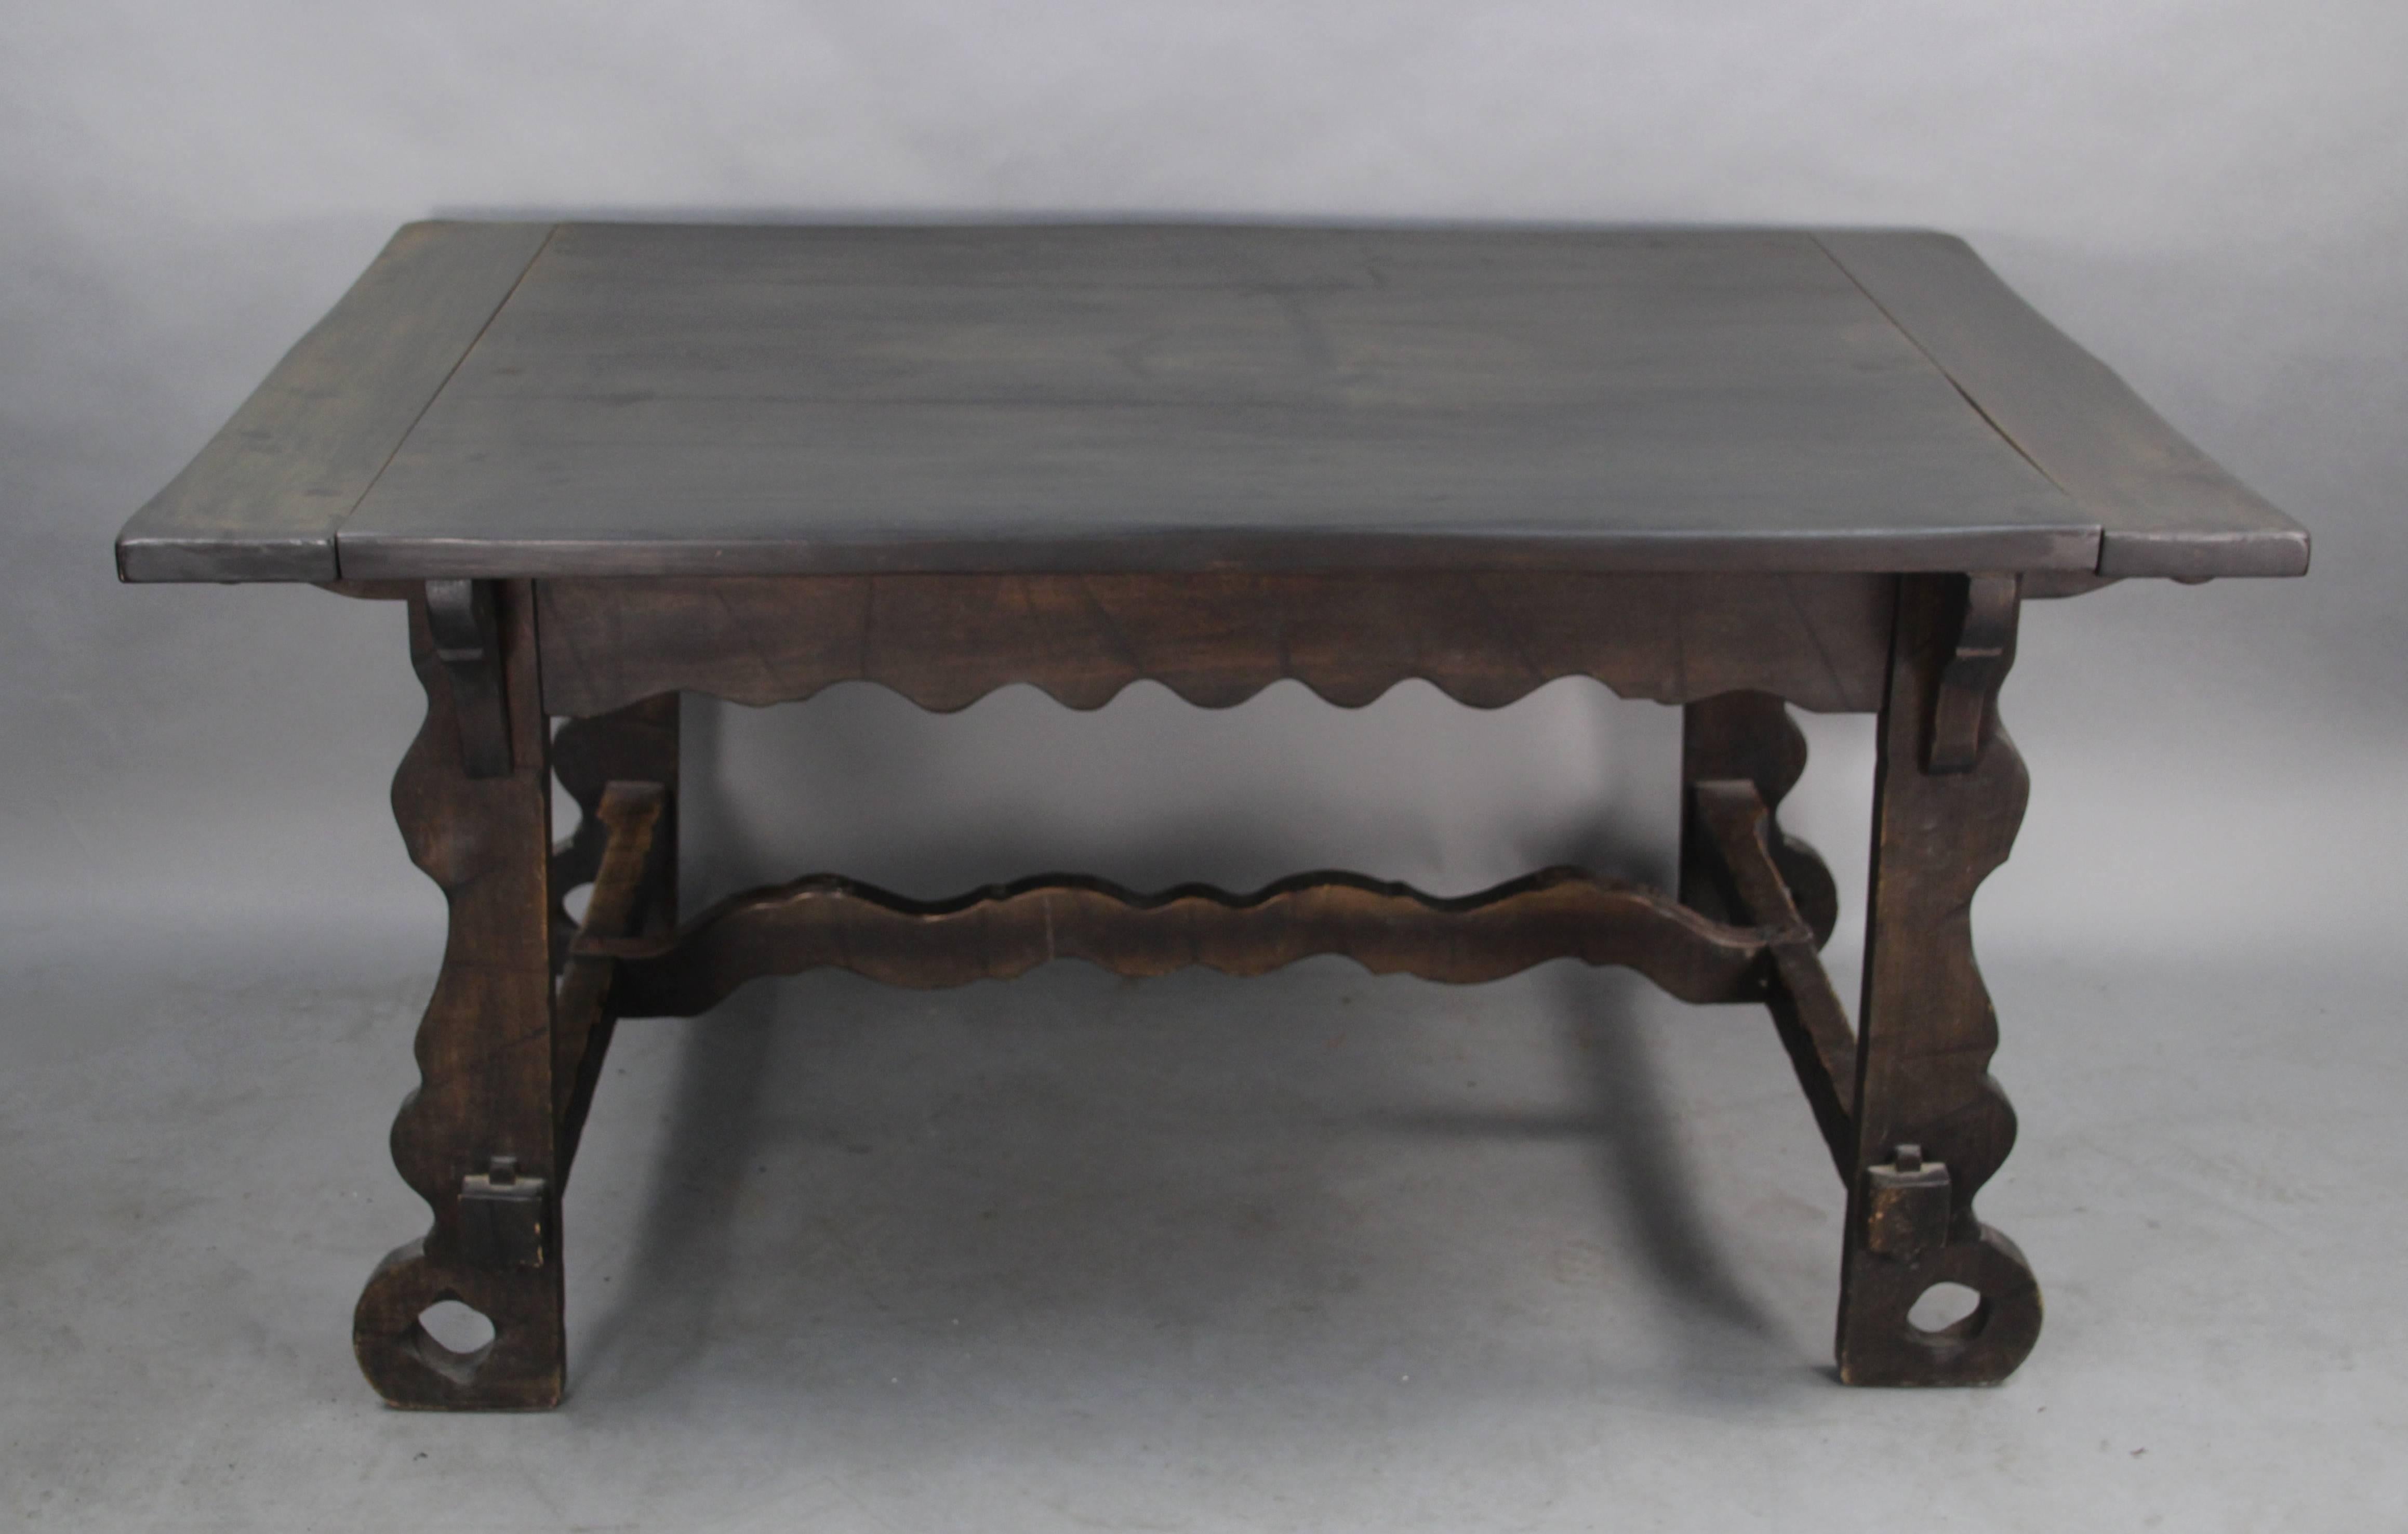 Signed Monterey table with four leaves. Measures: 94.5